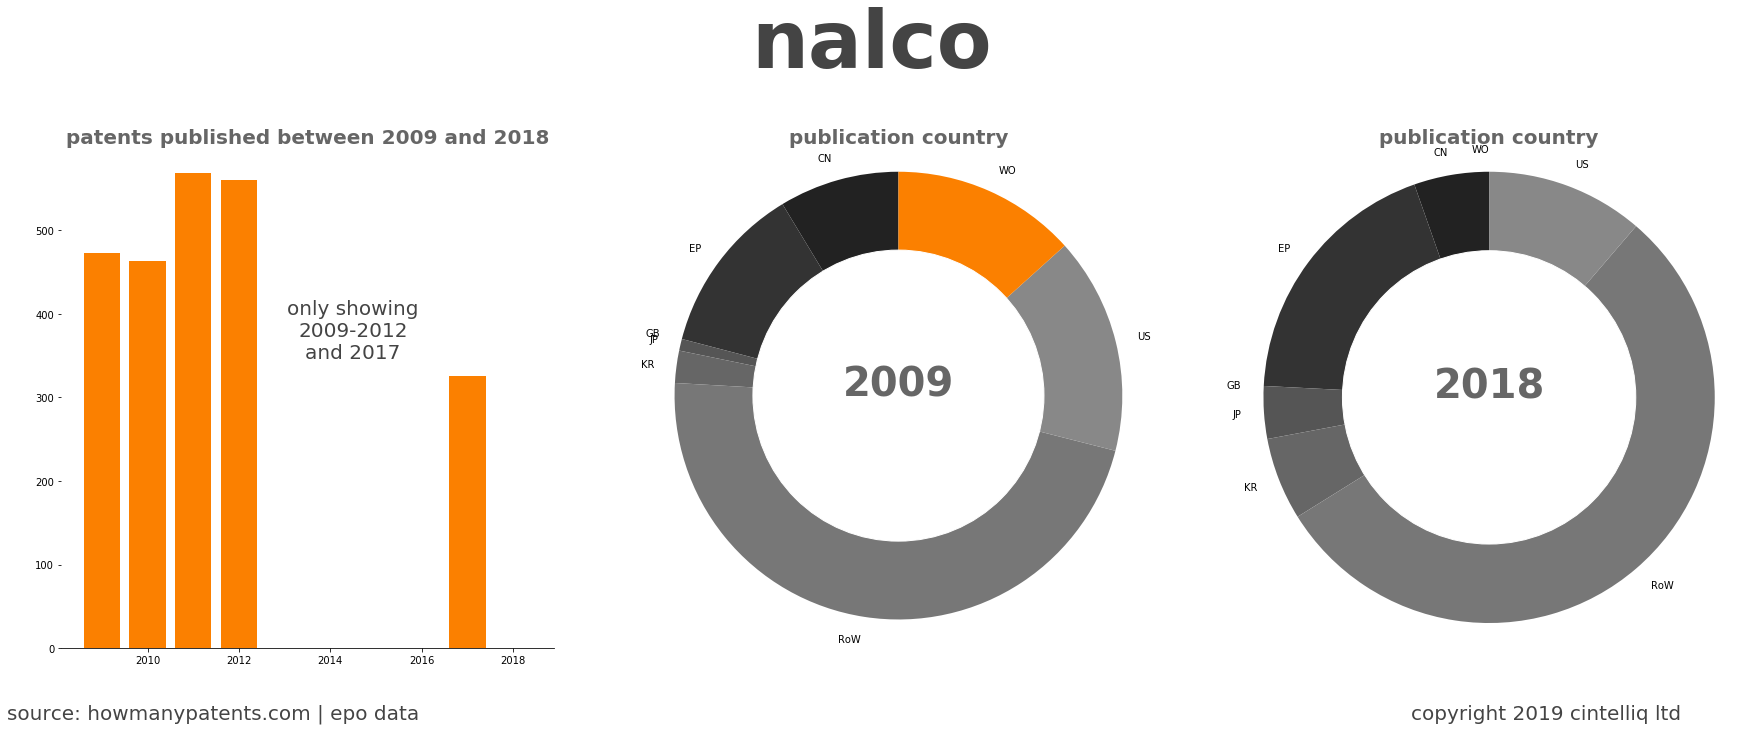 summary of patents for Nalco